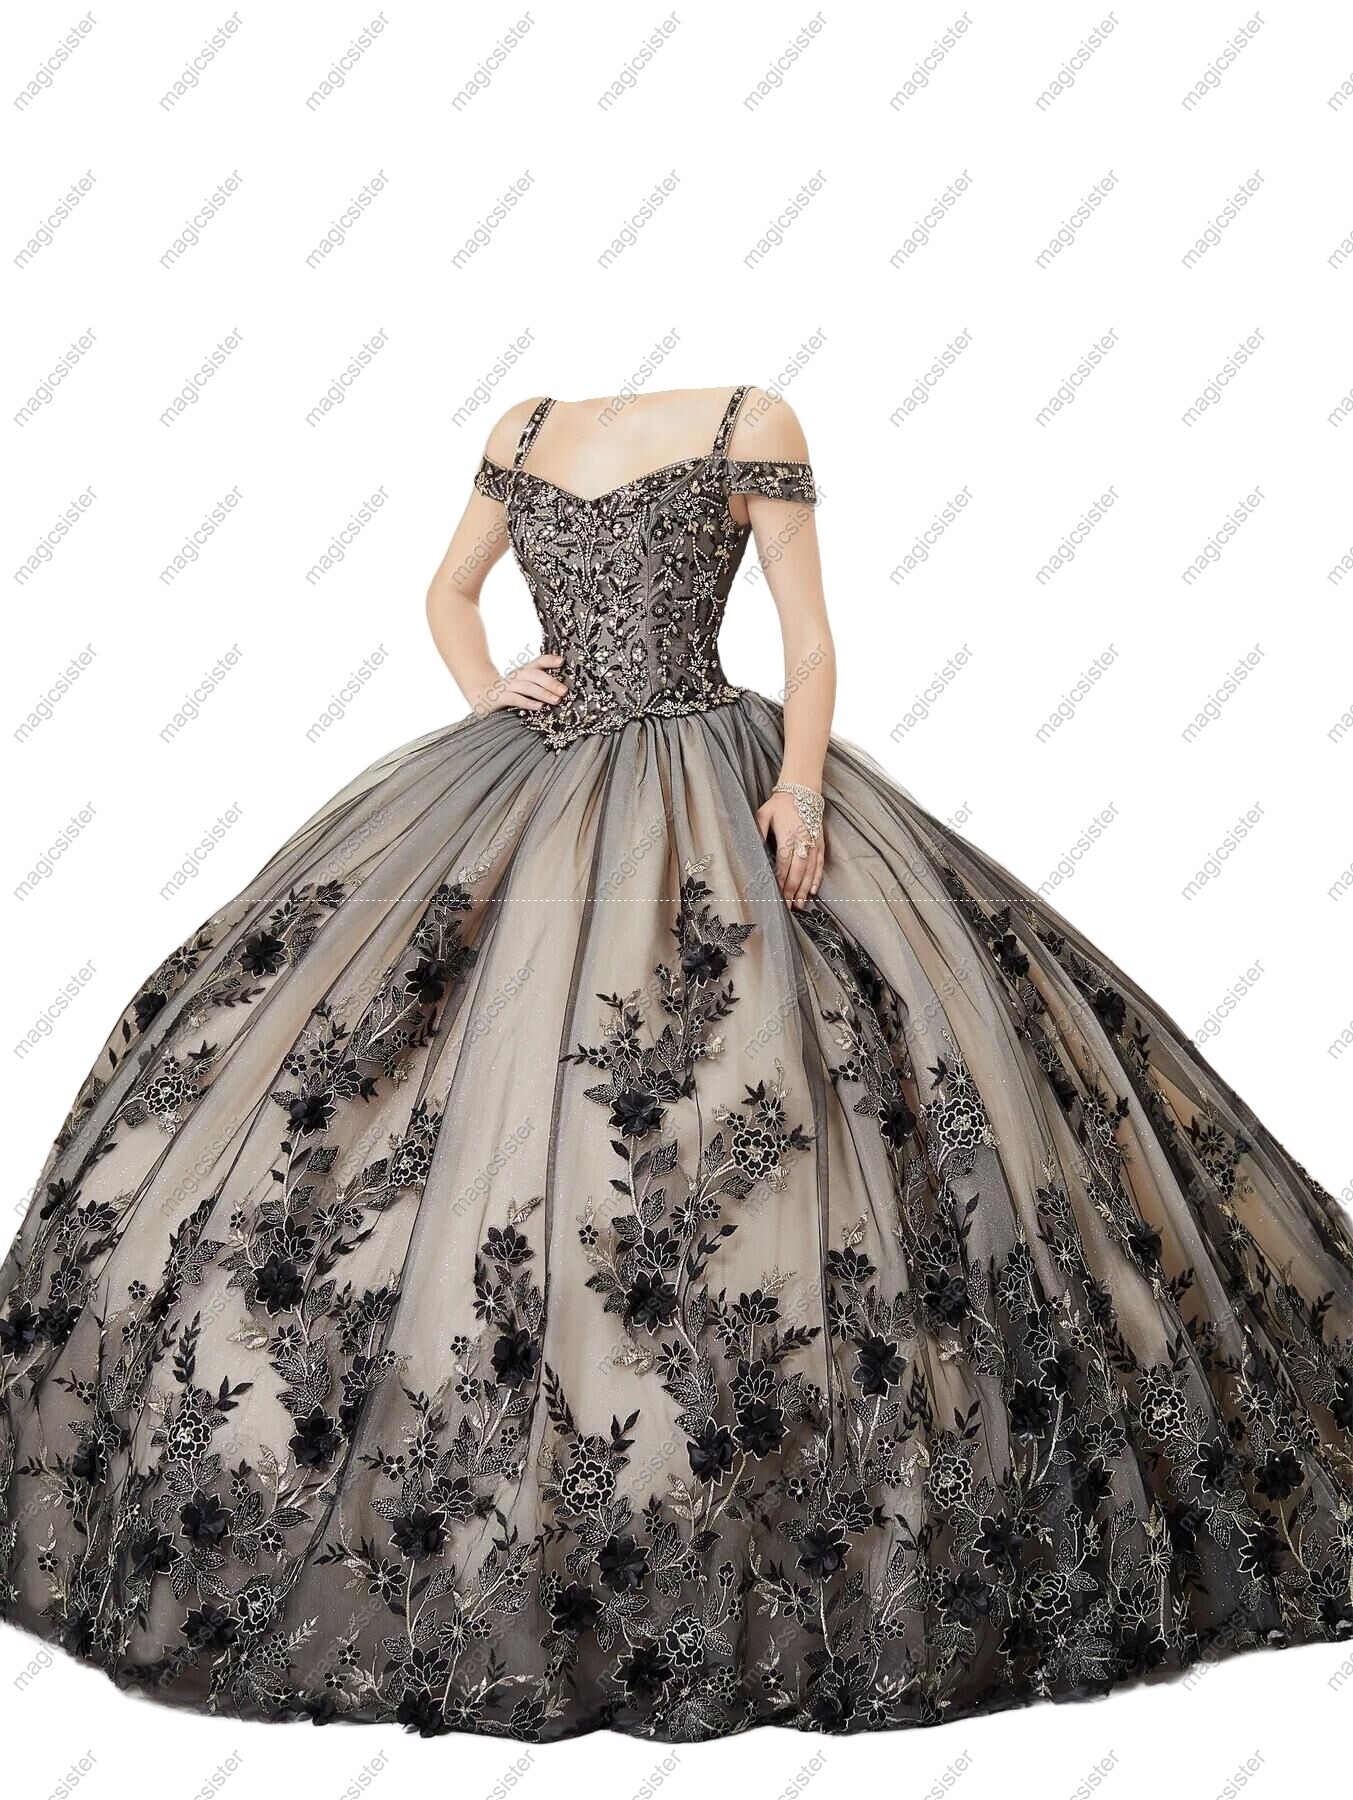 Instock Factory Lace Embroidery Quinceanera Dress